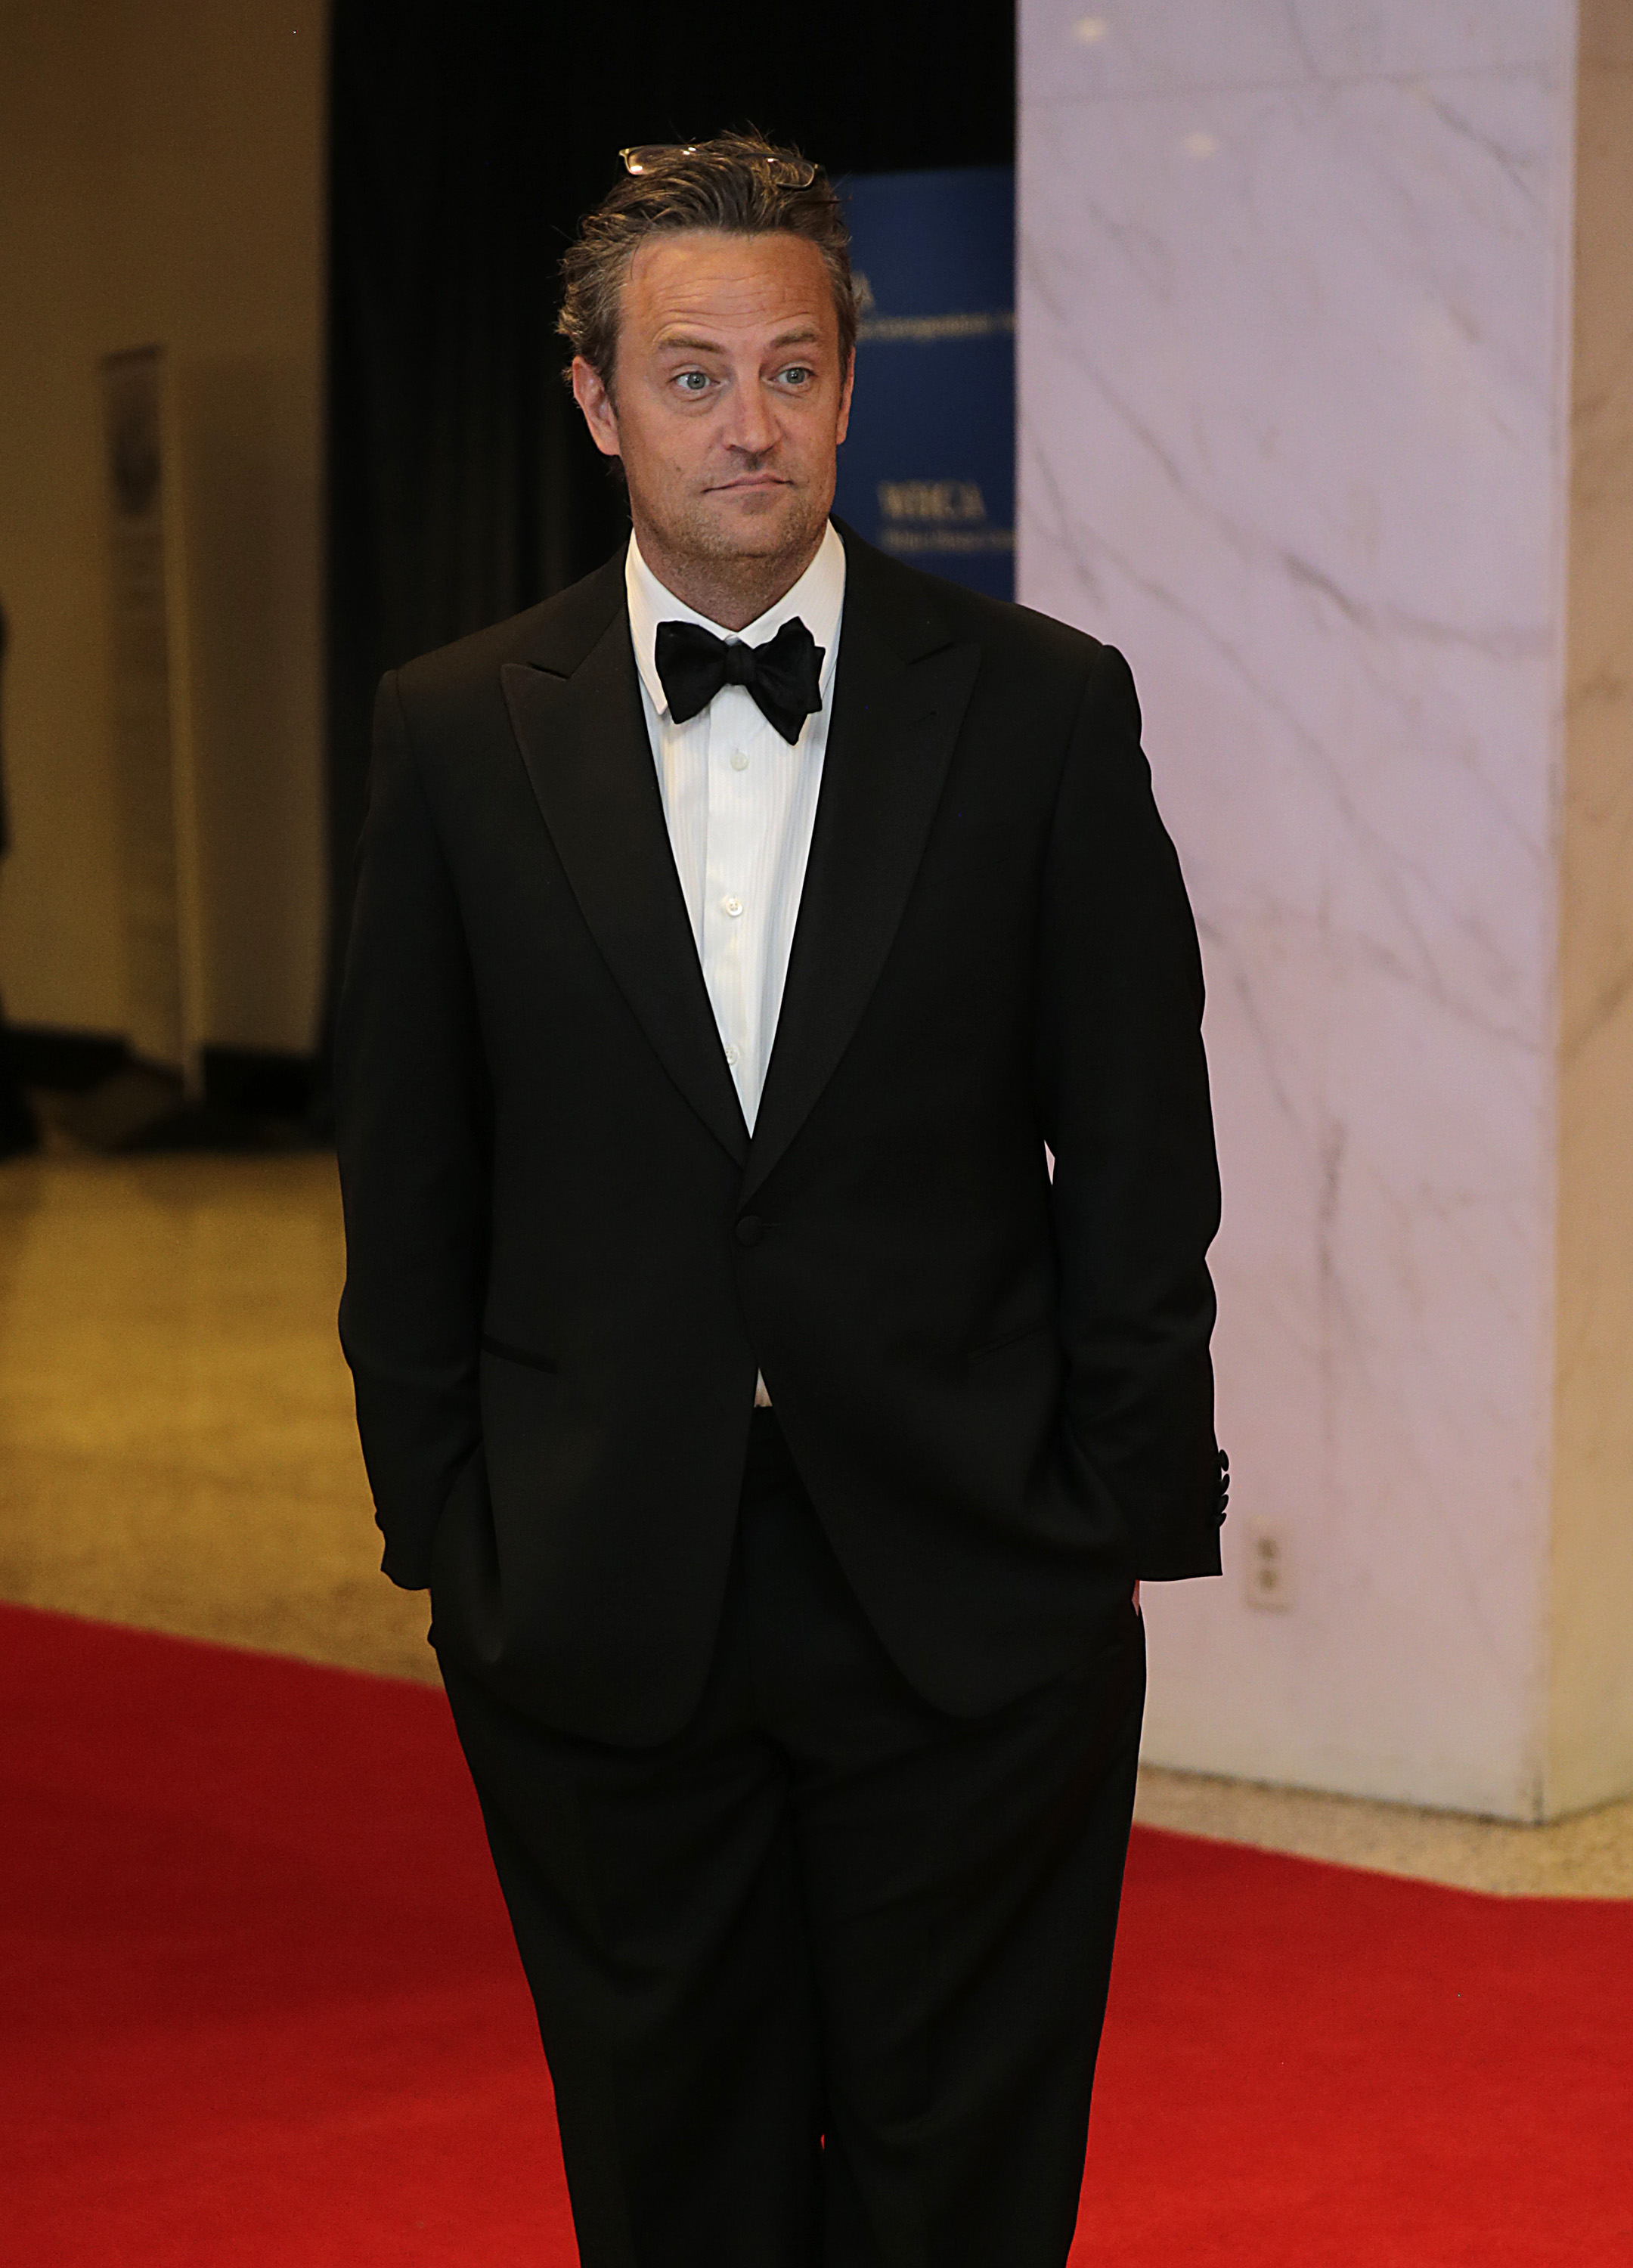 Guests Arrive At The White House Correspondents' Association (WHCA) Dinner